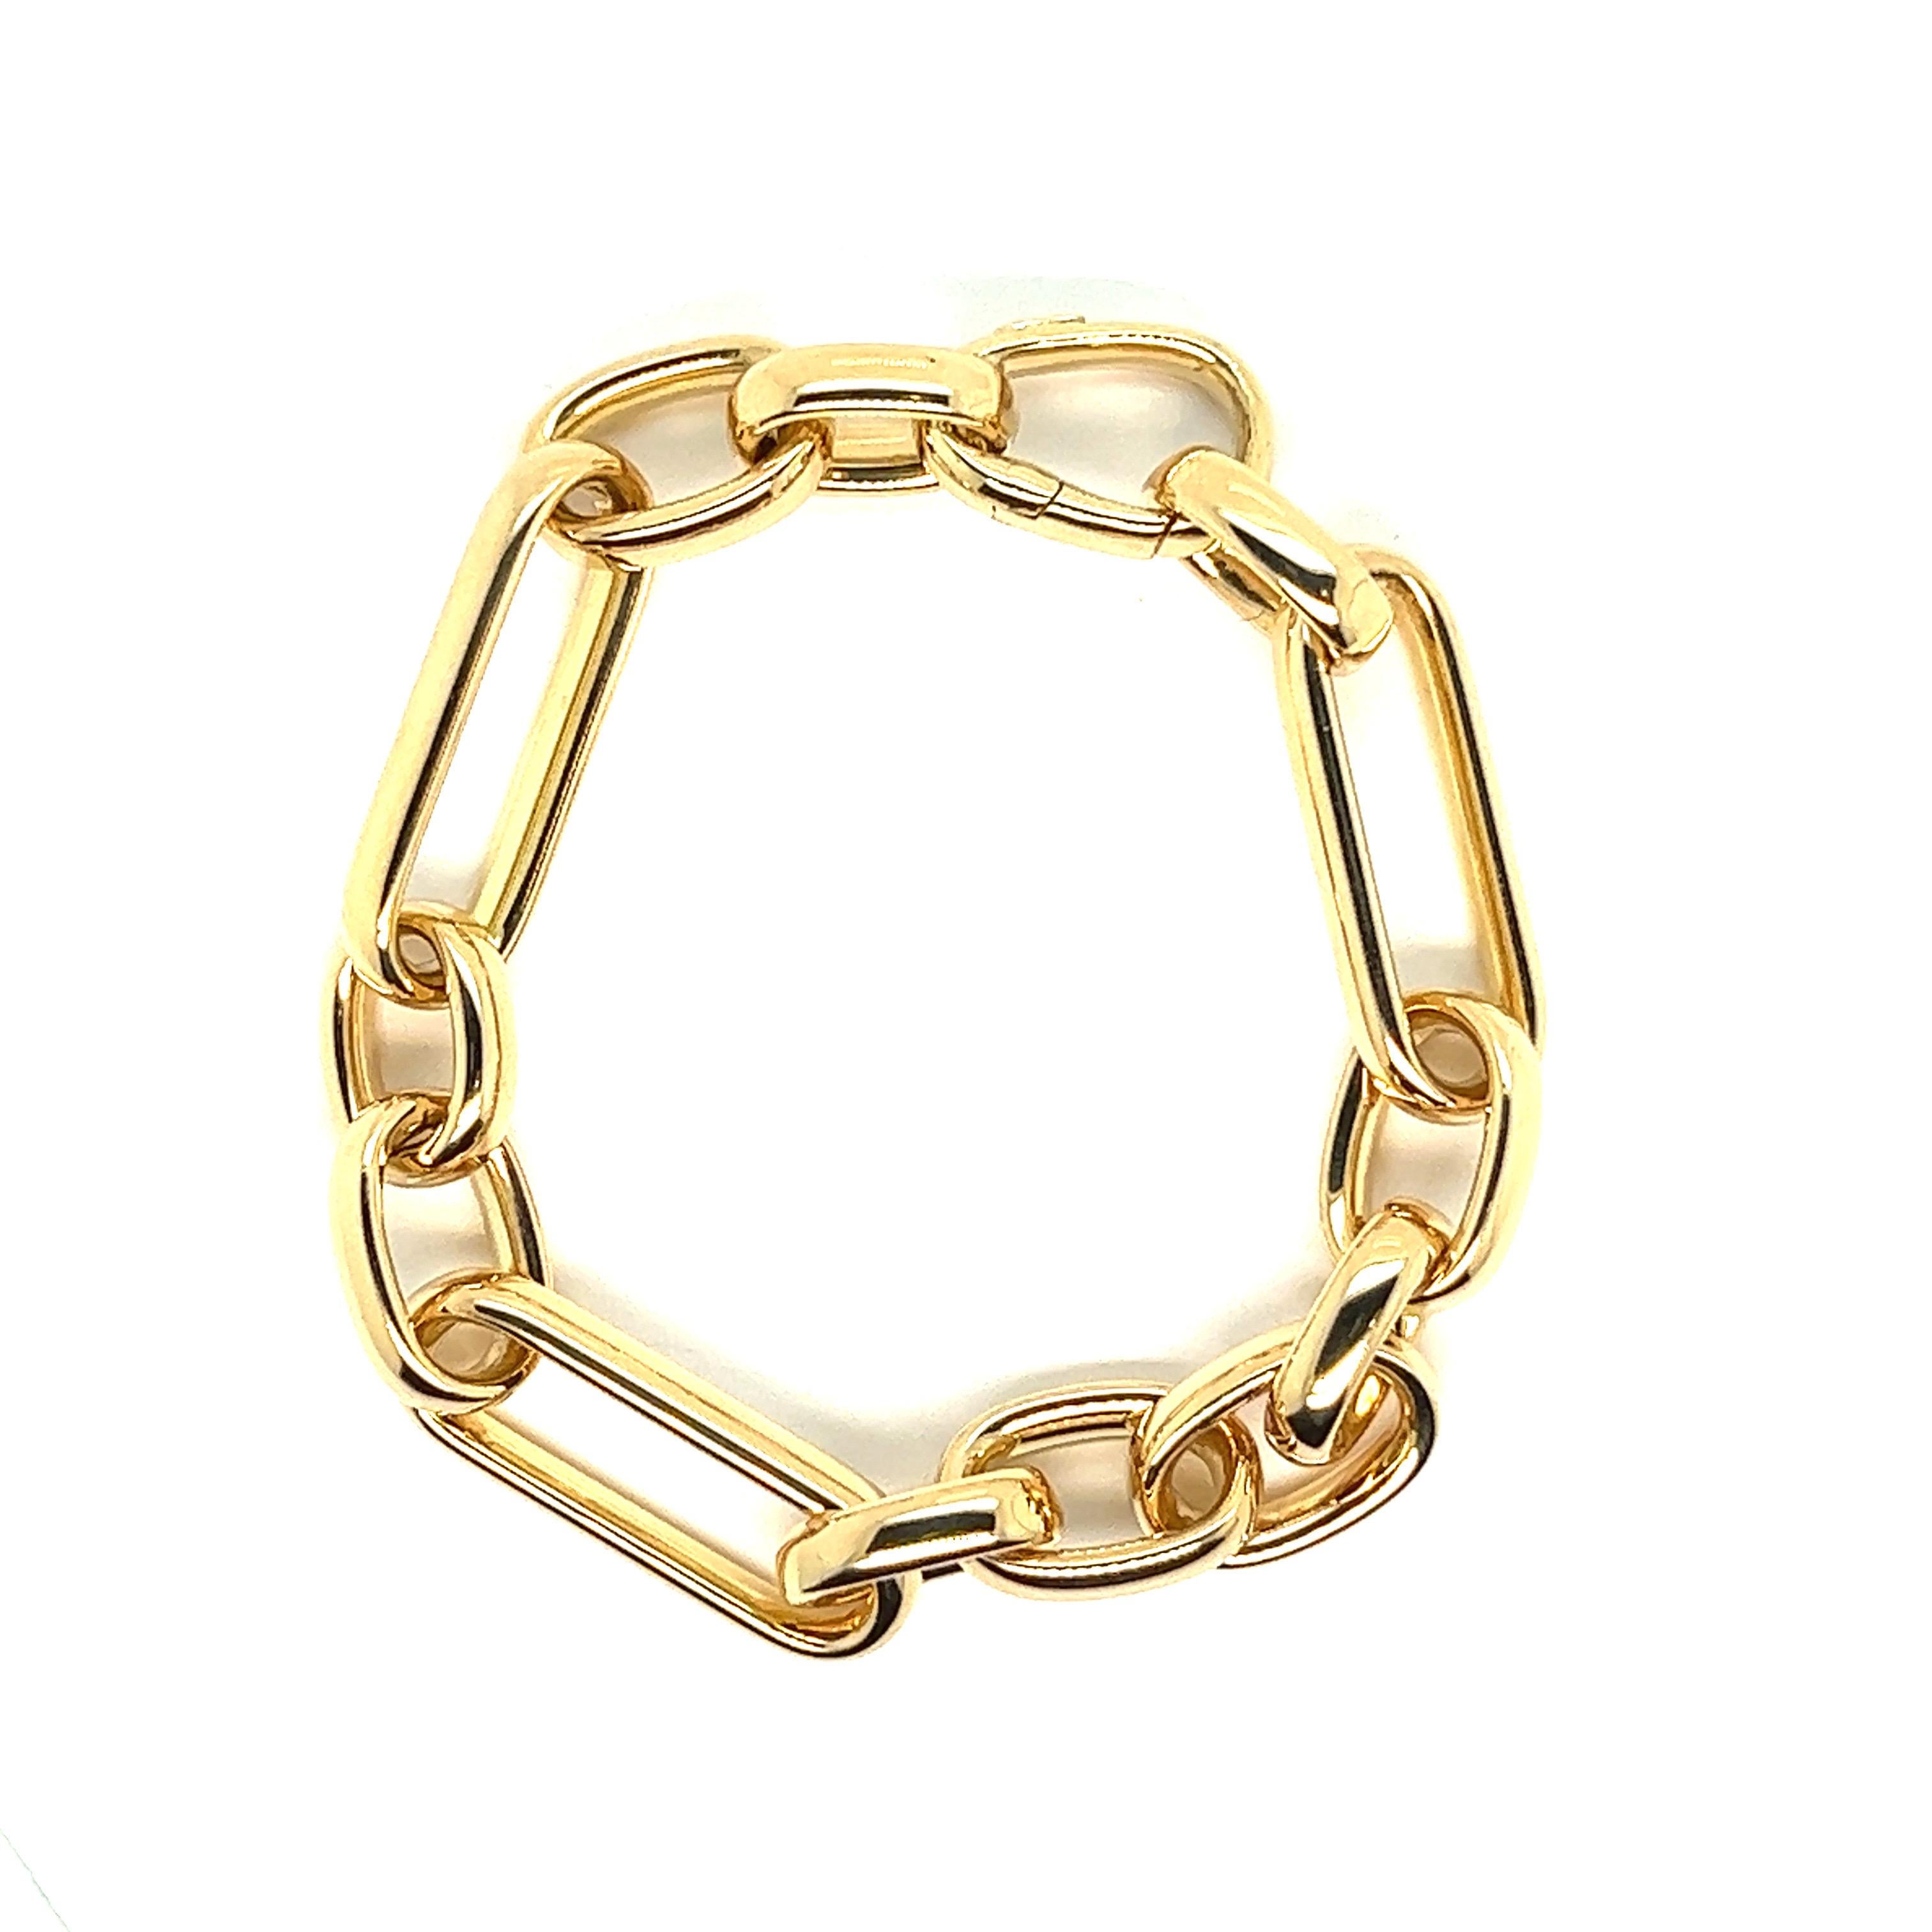 Discover this magnificent French gourmet bracelet in 18-carat gold, a jewel of timeless beauty and exceptional refinement. Every detail of this bracelet has been carefully designed to offer classic, elegant style.

The bracelet is distinguished by